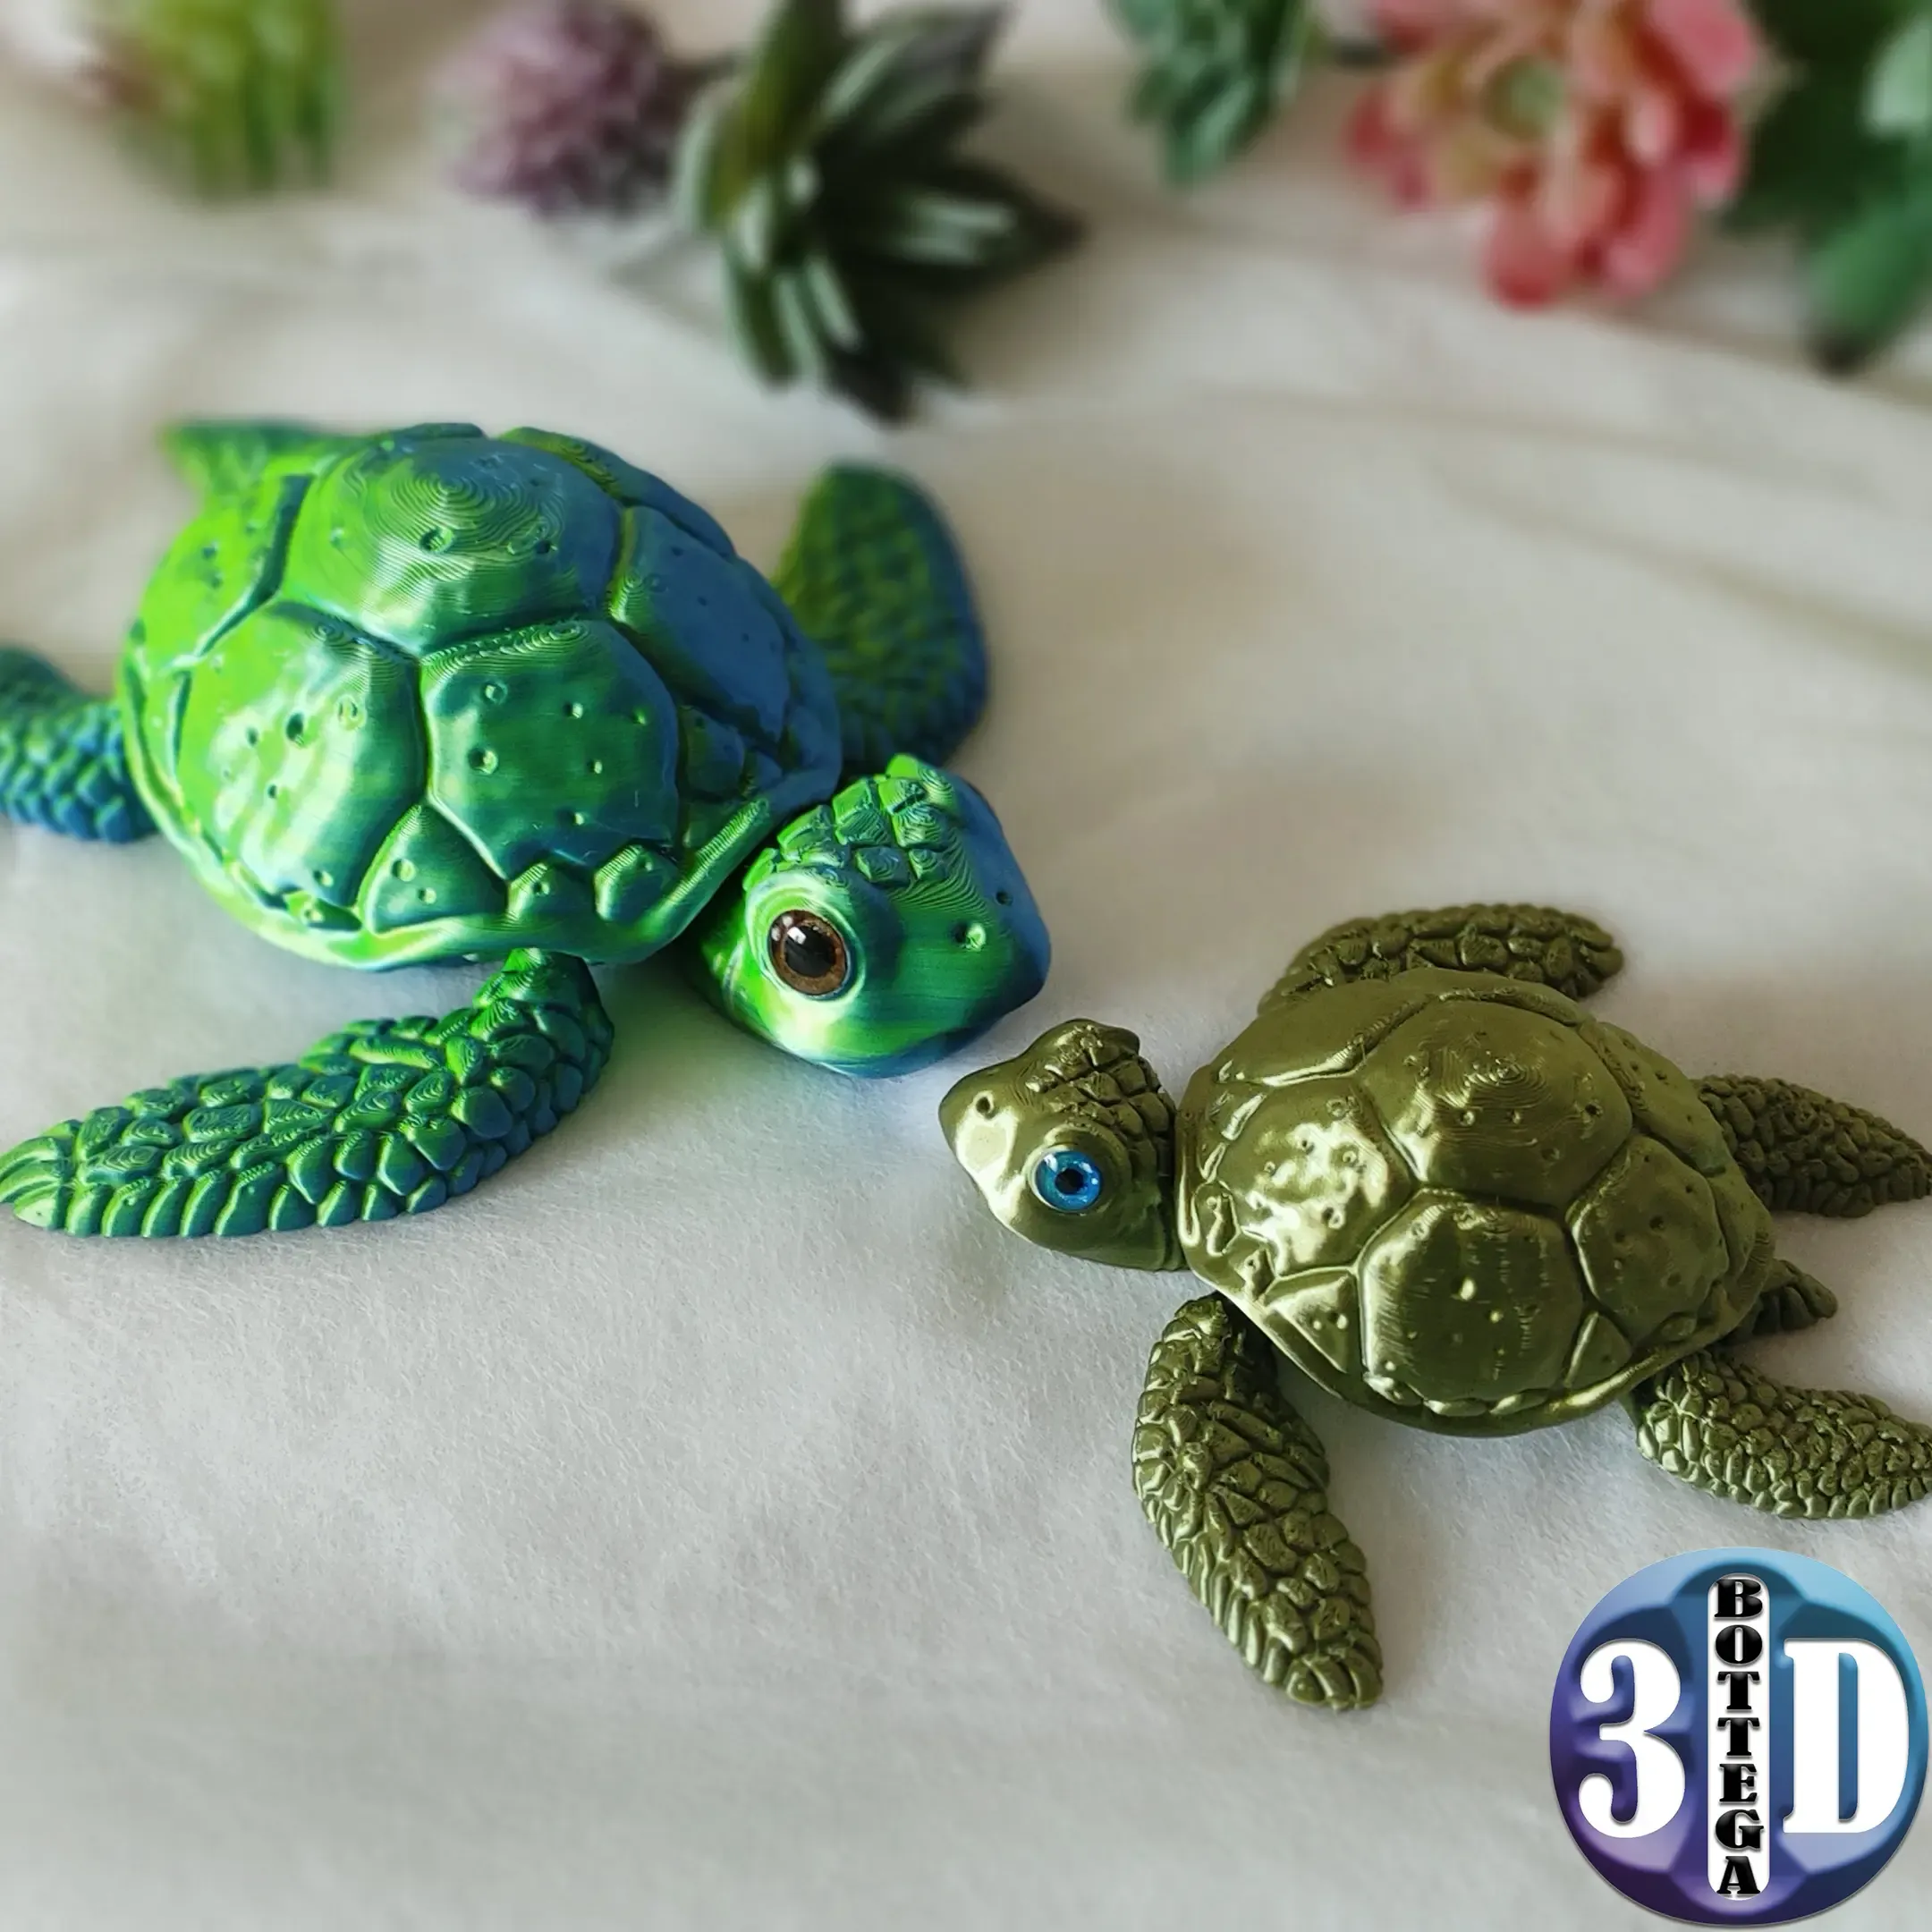 Cute Articulated Sea Turtle, print in place, no supports